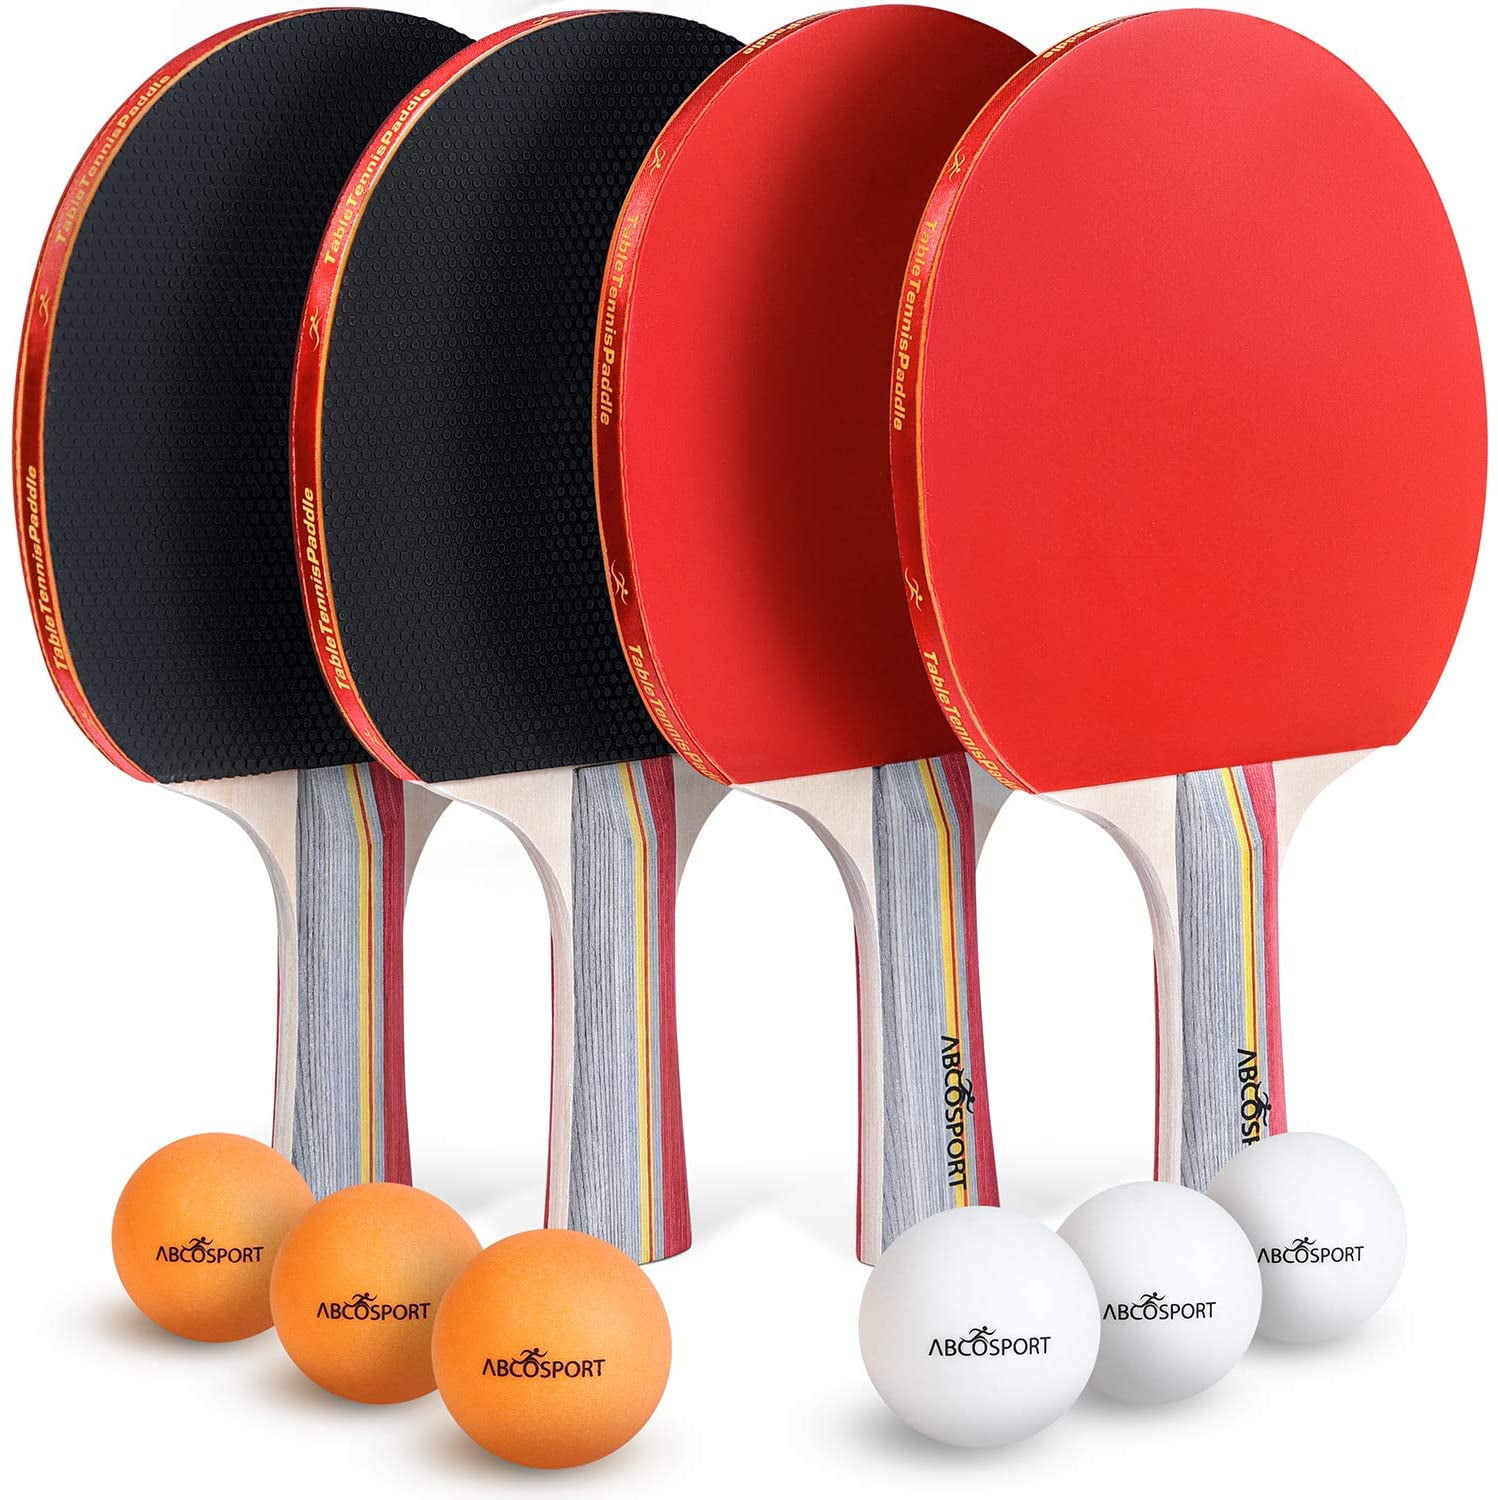 2 Table Tennis Paddles/Rackets with 3 Balls Rivon Ping Pong Paddle/Racket Set Travel Case and More 